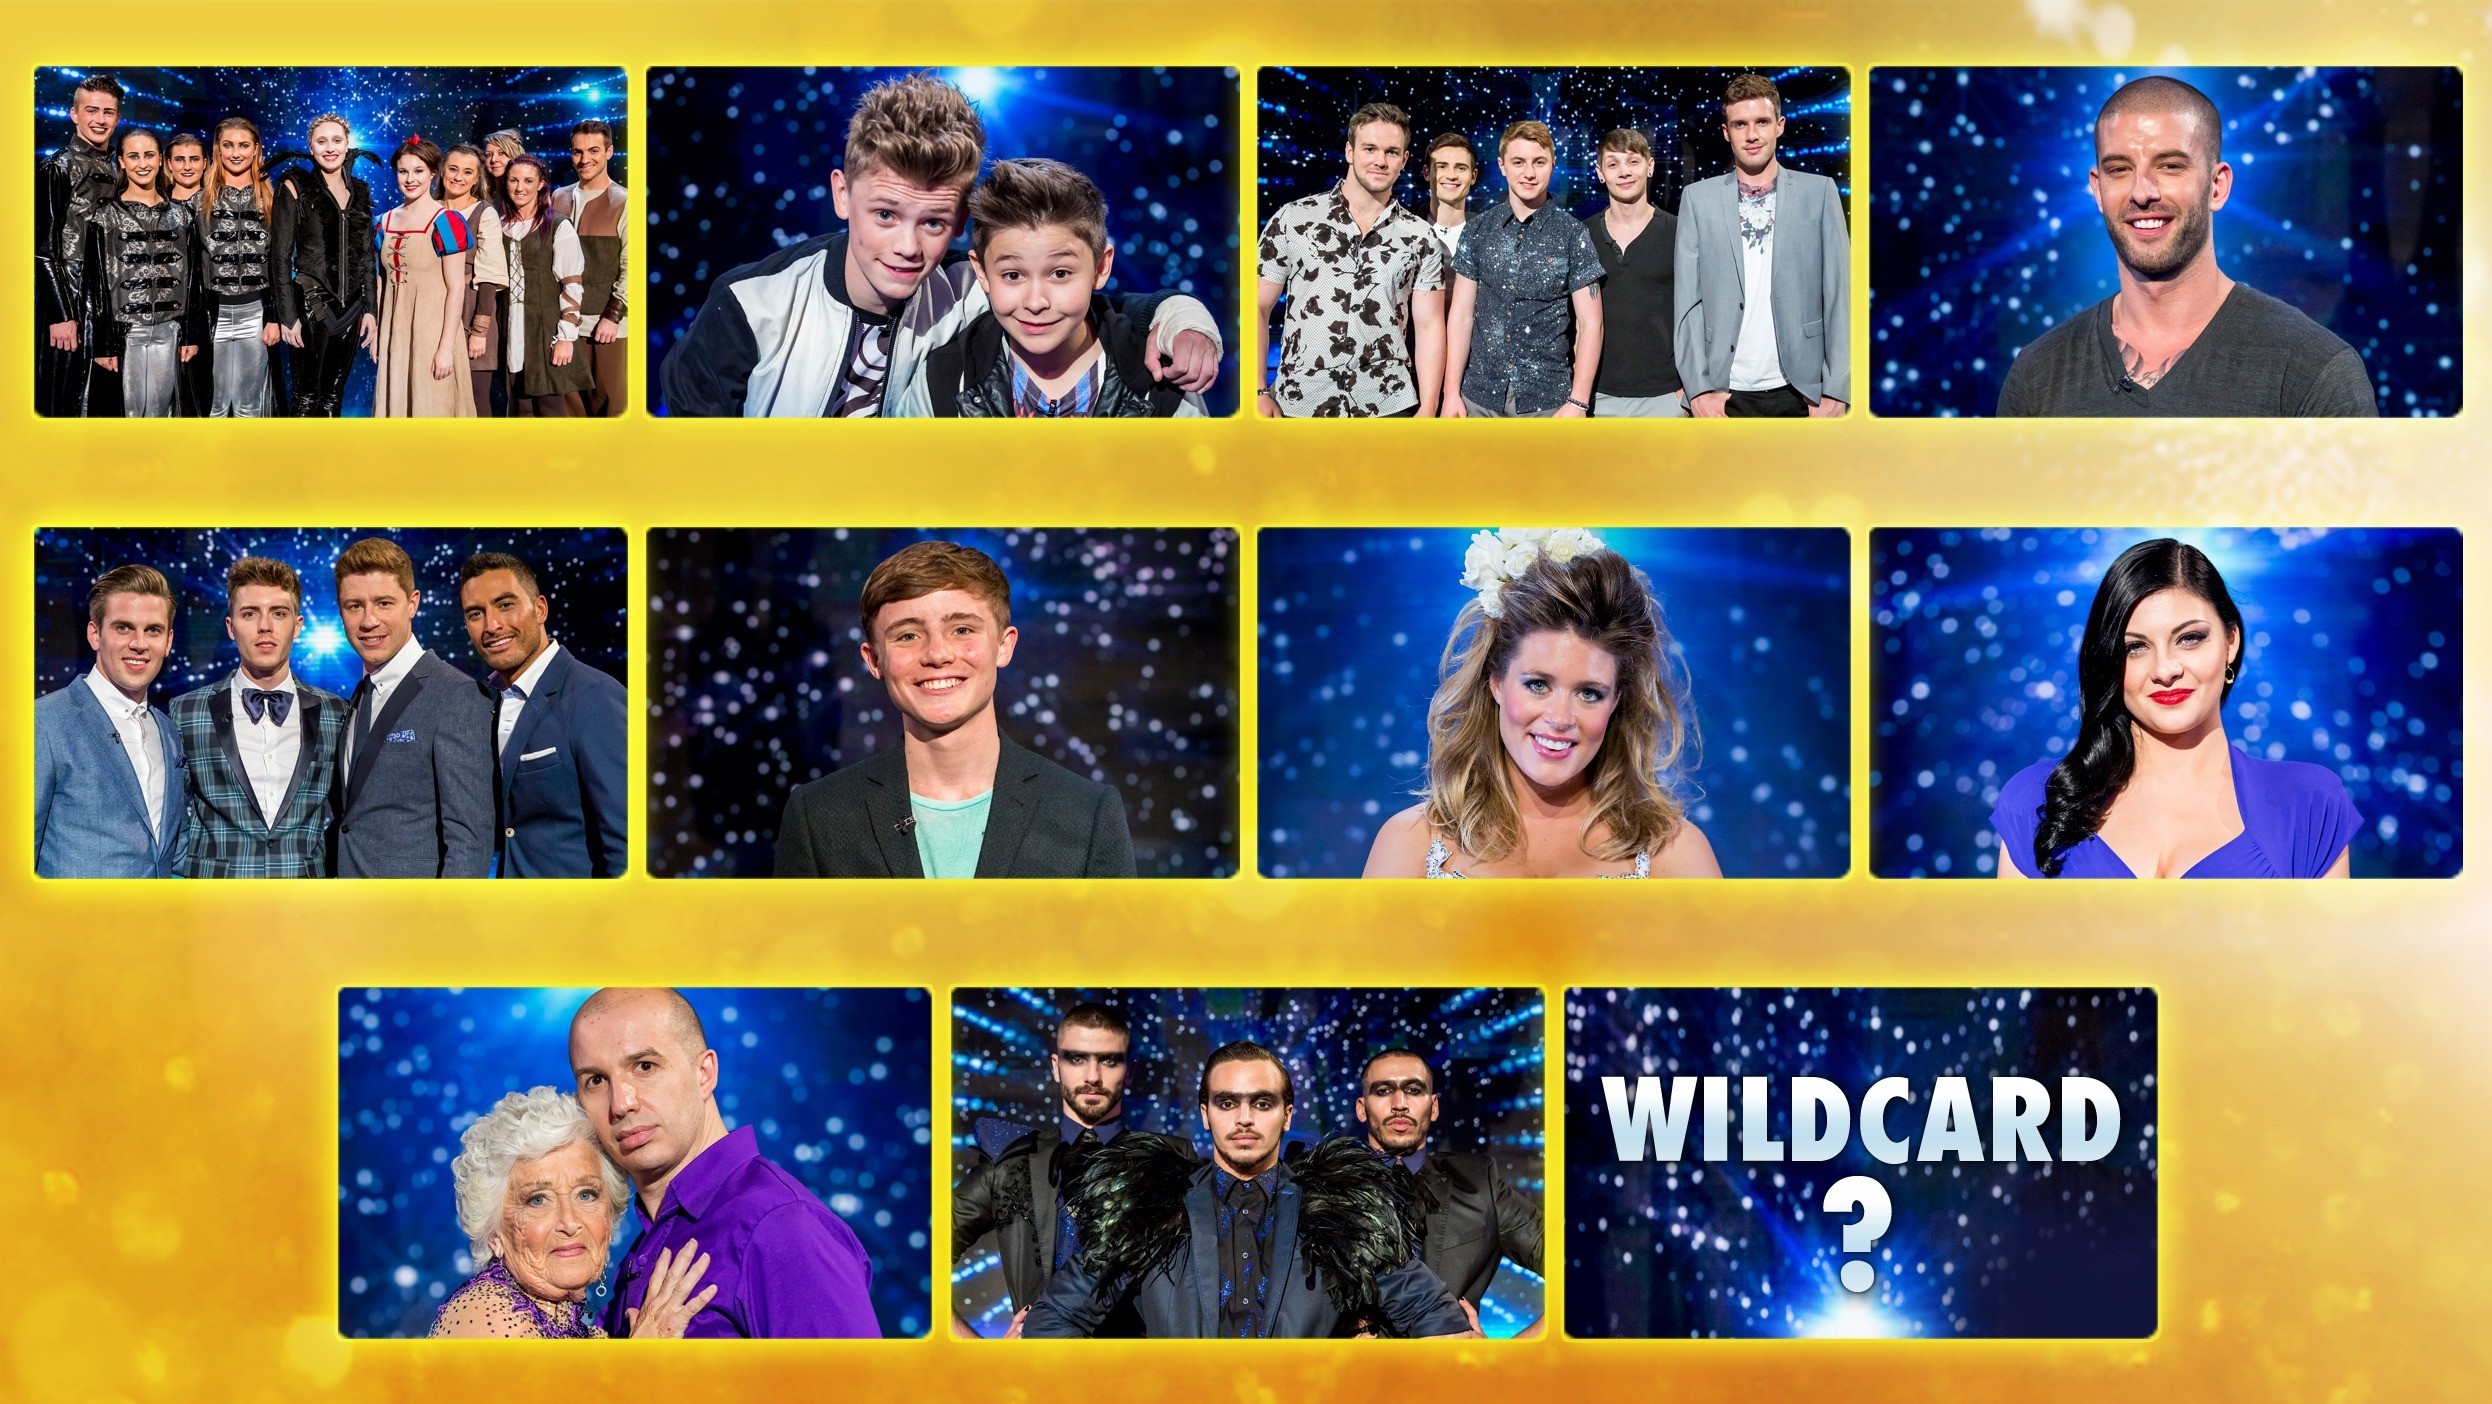 Who will the Wild Card be? Britain's Got Talent